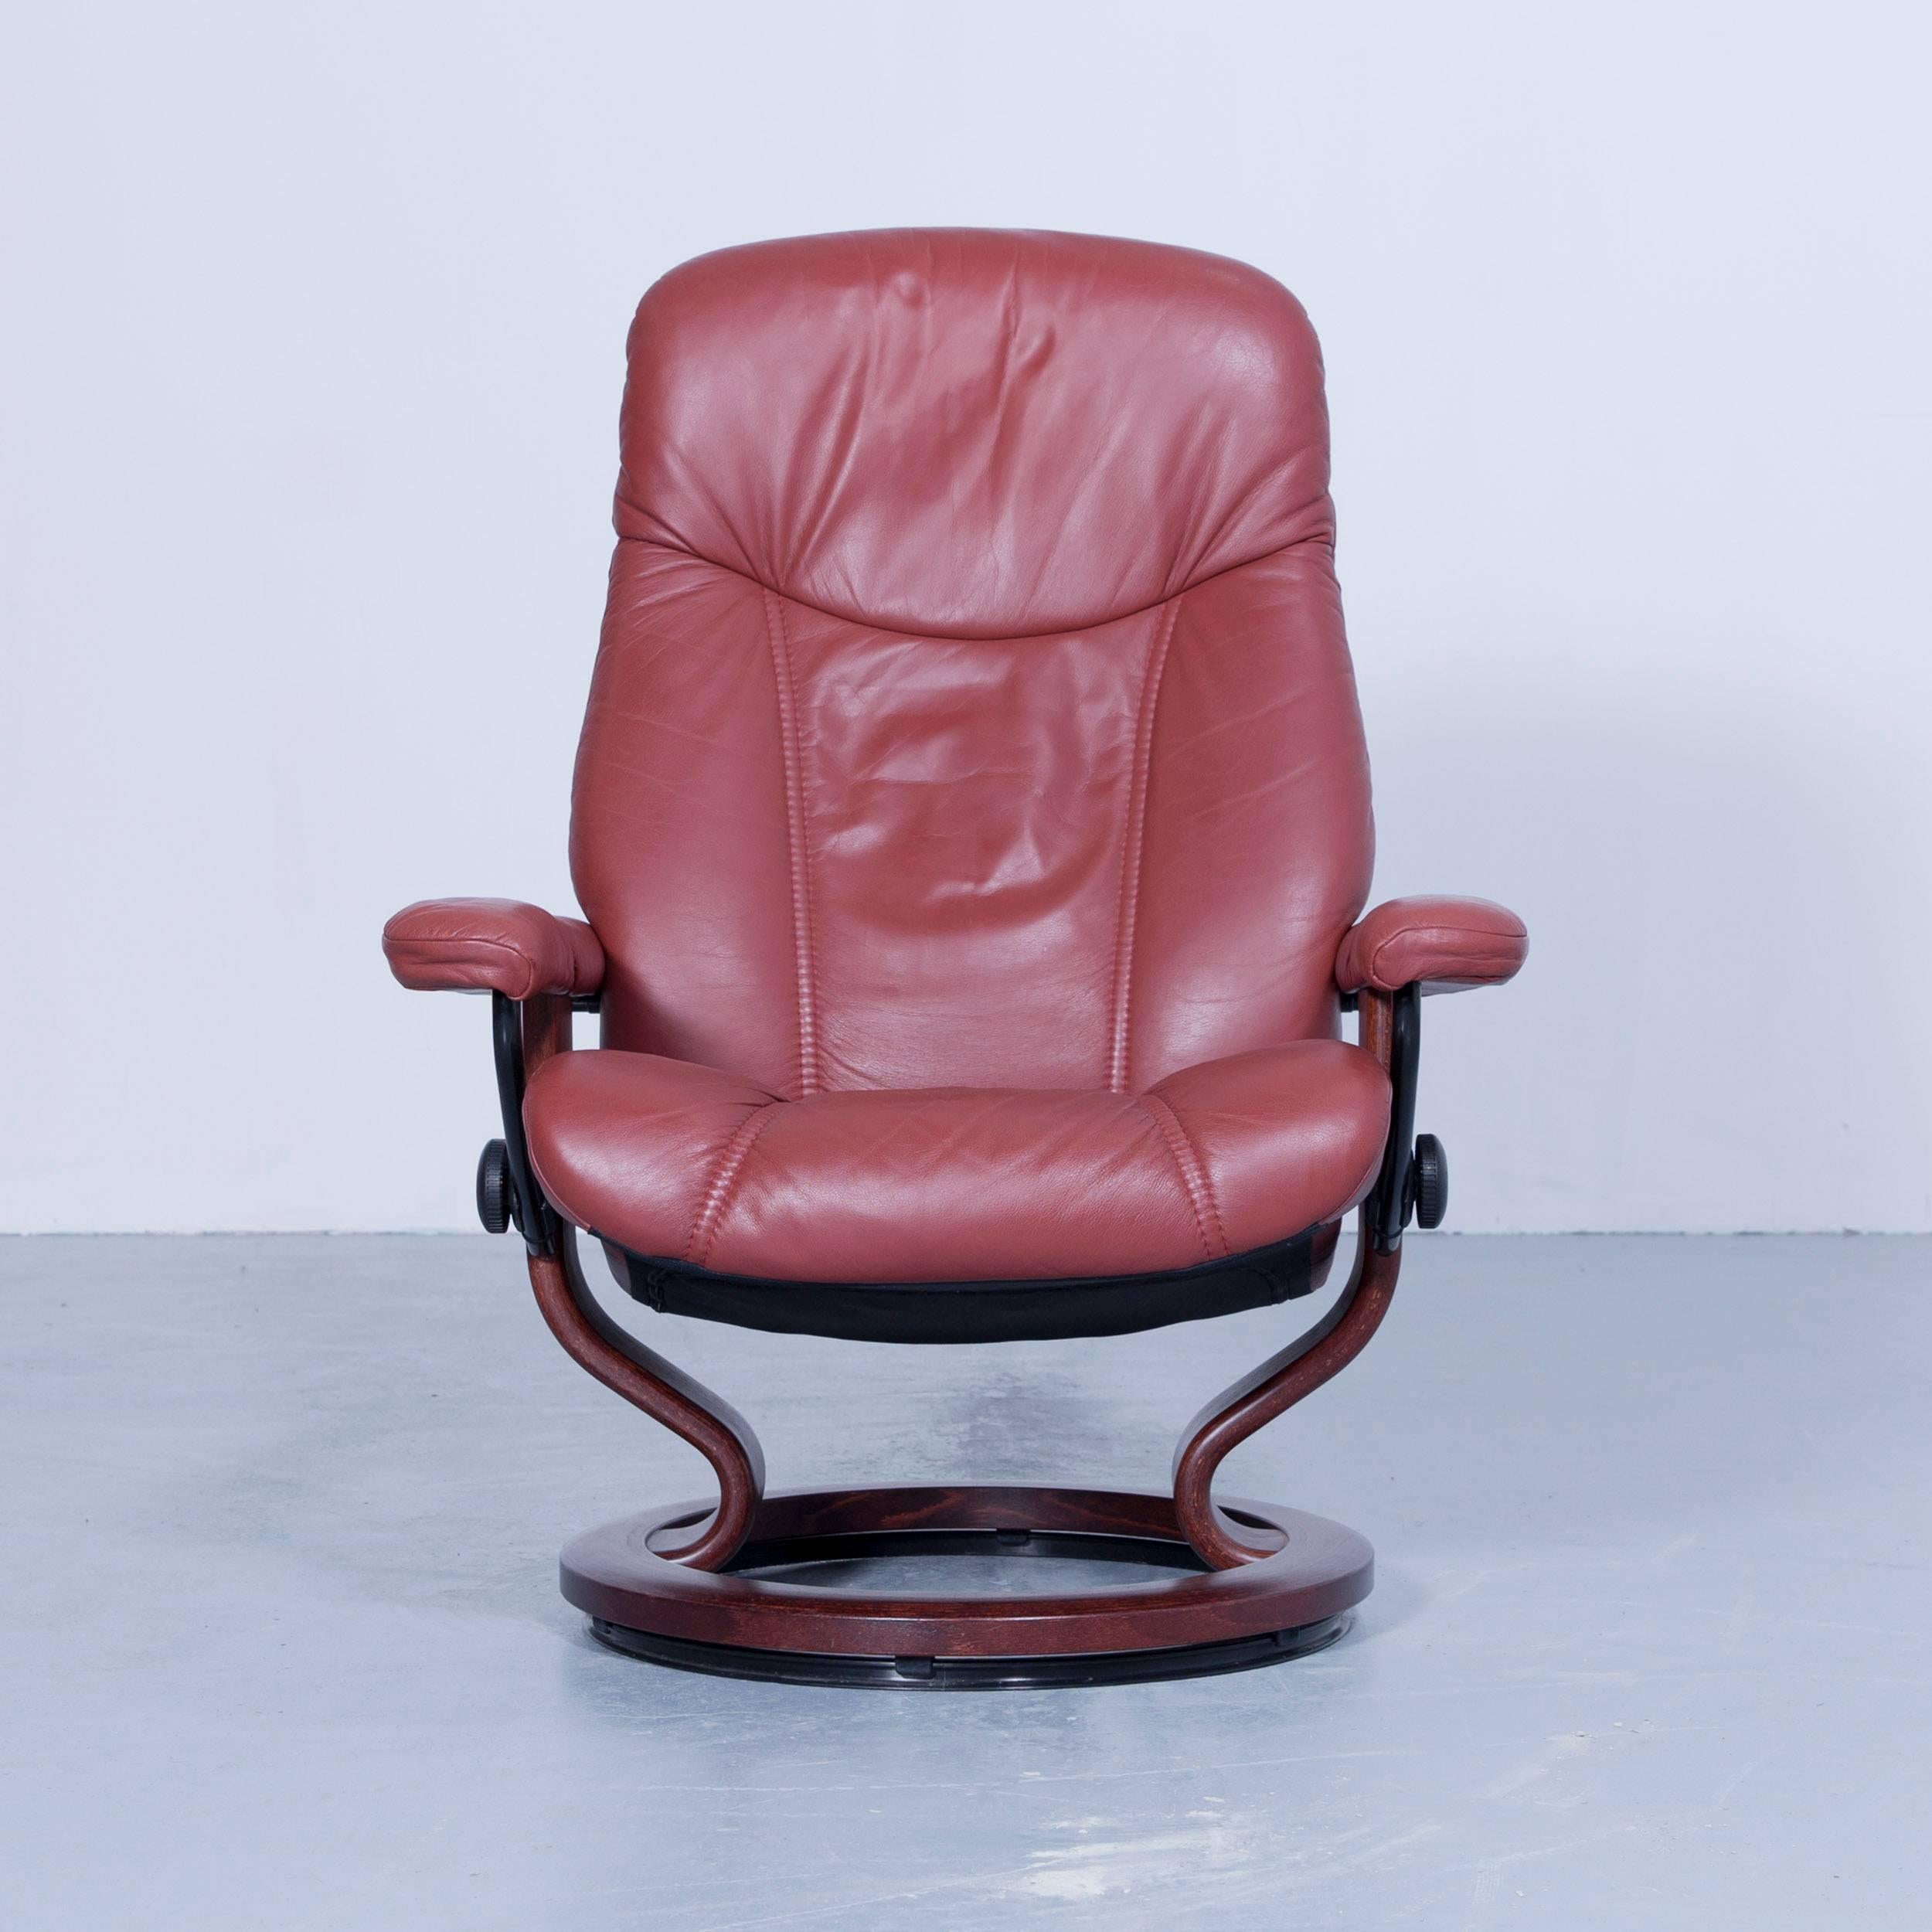 Red brown colored original Stressless Consul M designer leather Swivel chair in a minimalistic and modern design, with convenient functions, made for pure comfort and flexibility.